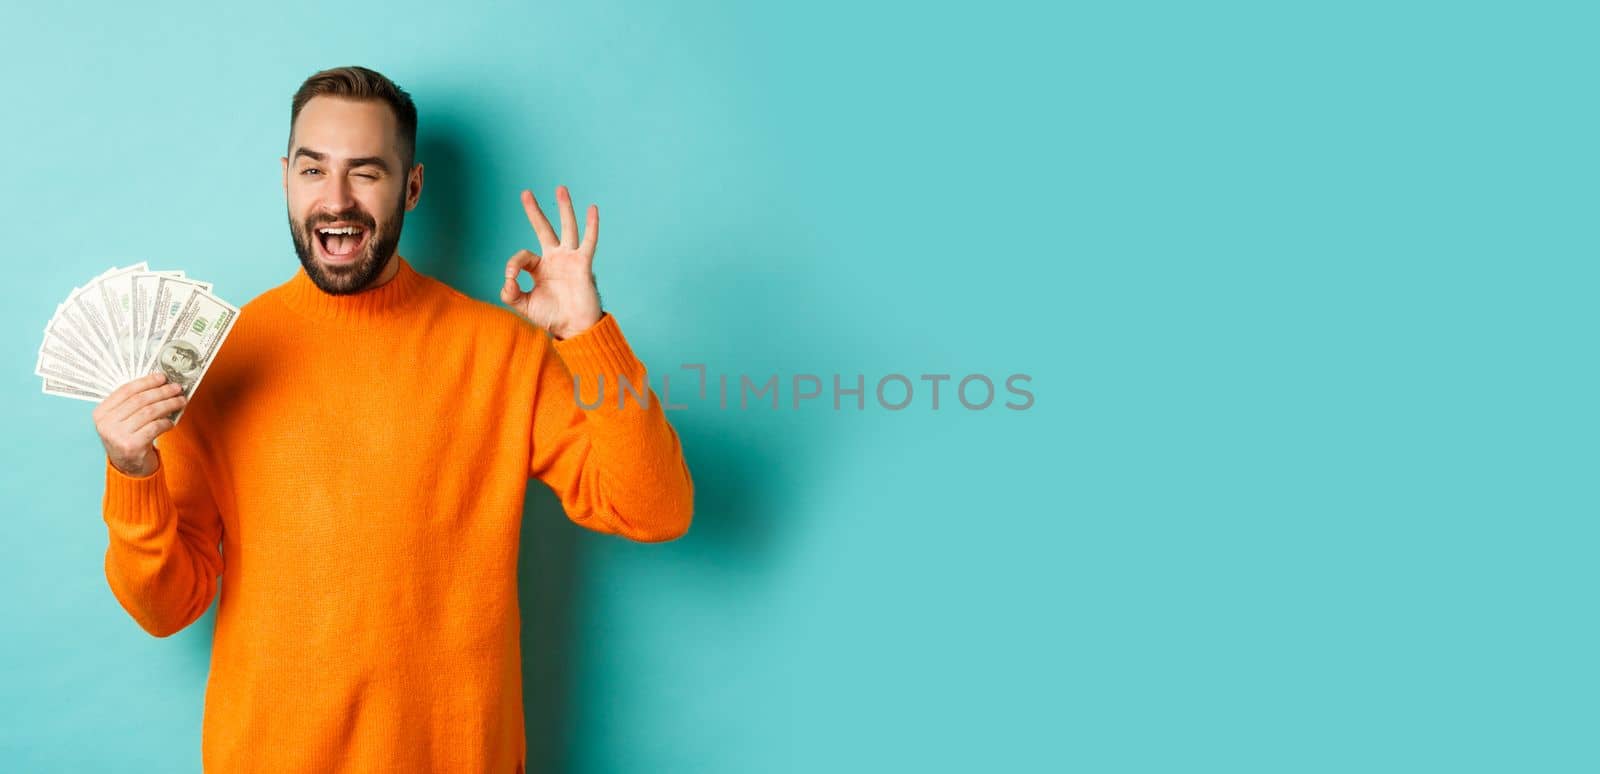 Shopping. Excited guy holding money, showing ok sign and winking, standing over light blue background. Copy space